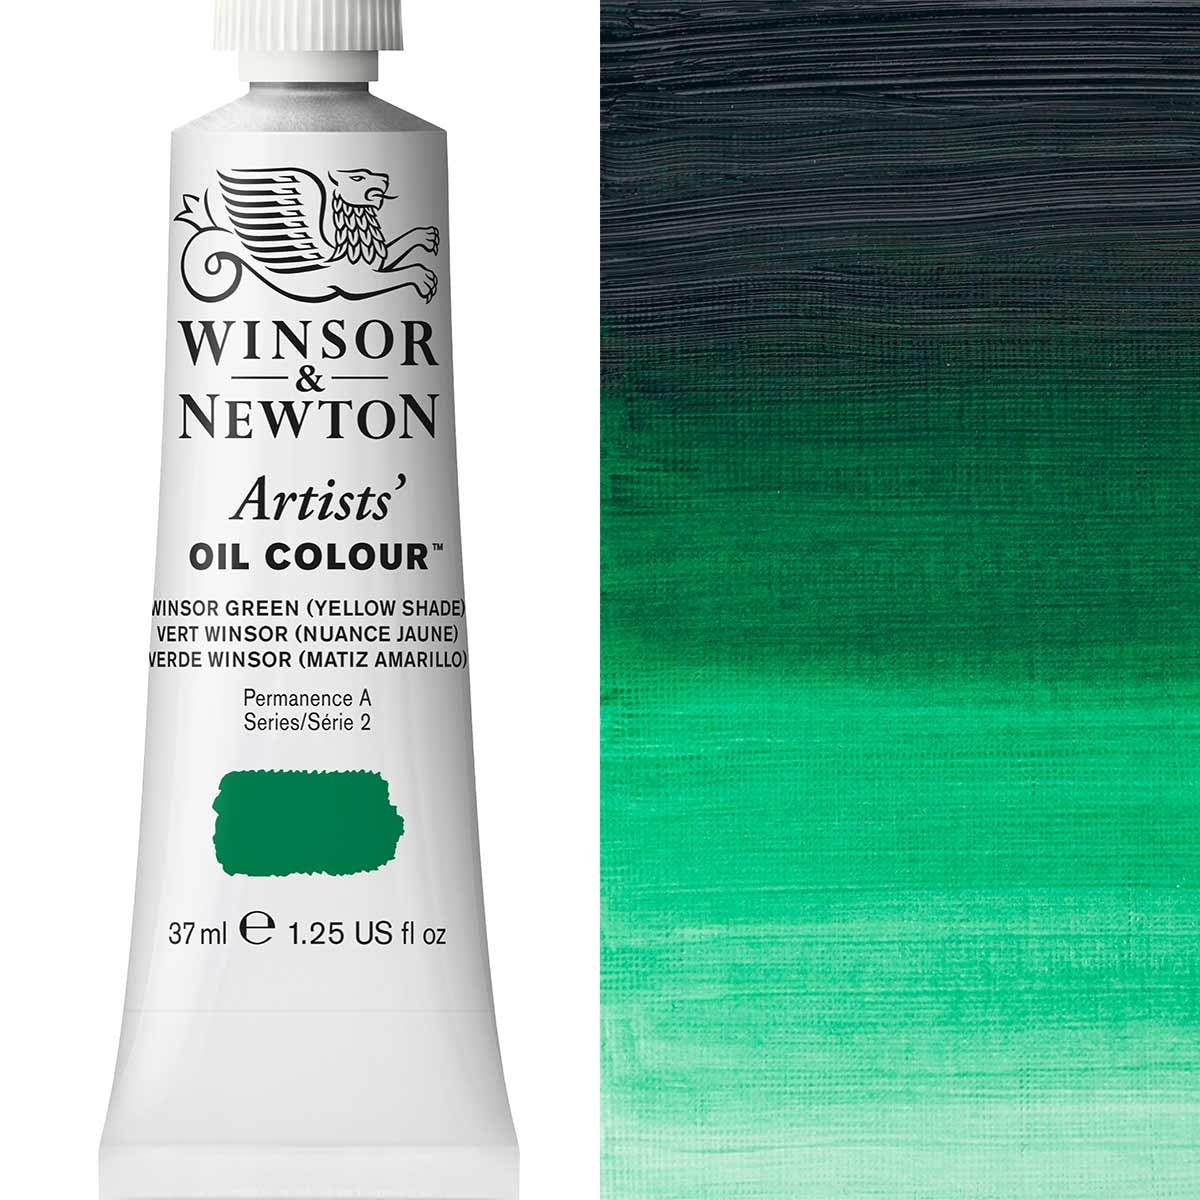 Winsor and Newton - Artists' Oil Colour - 37ml - Winsor Green Yellow Shade